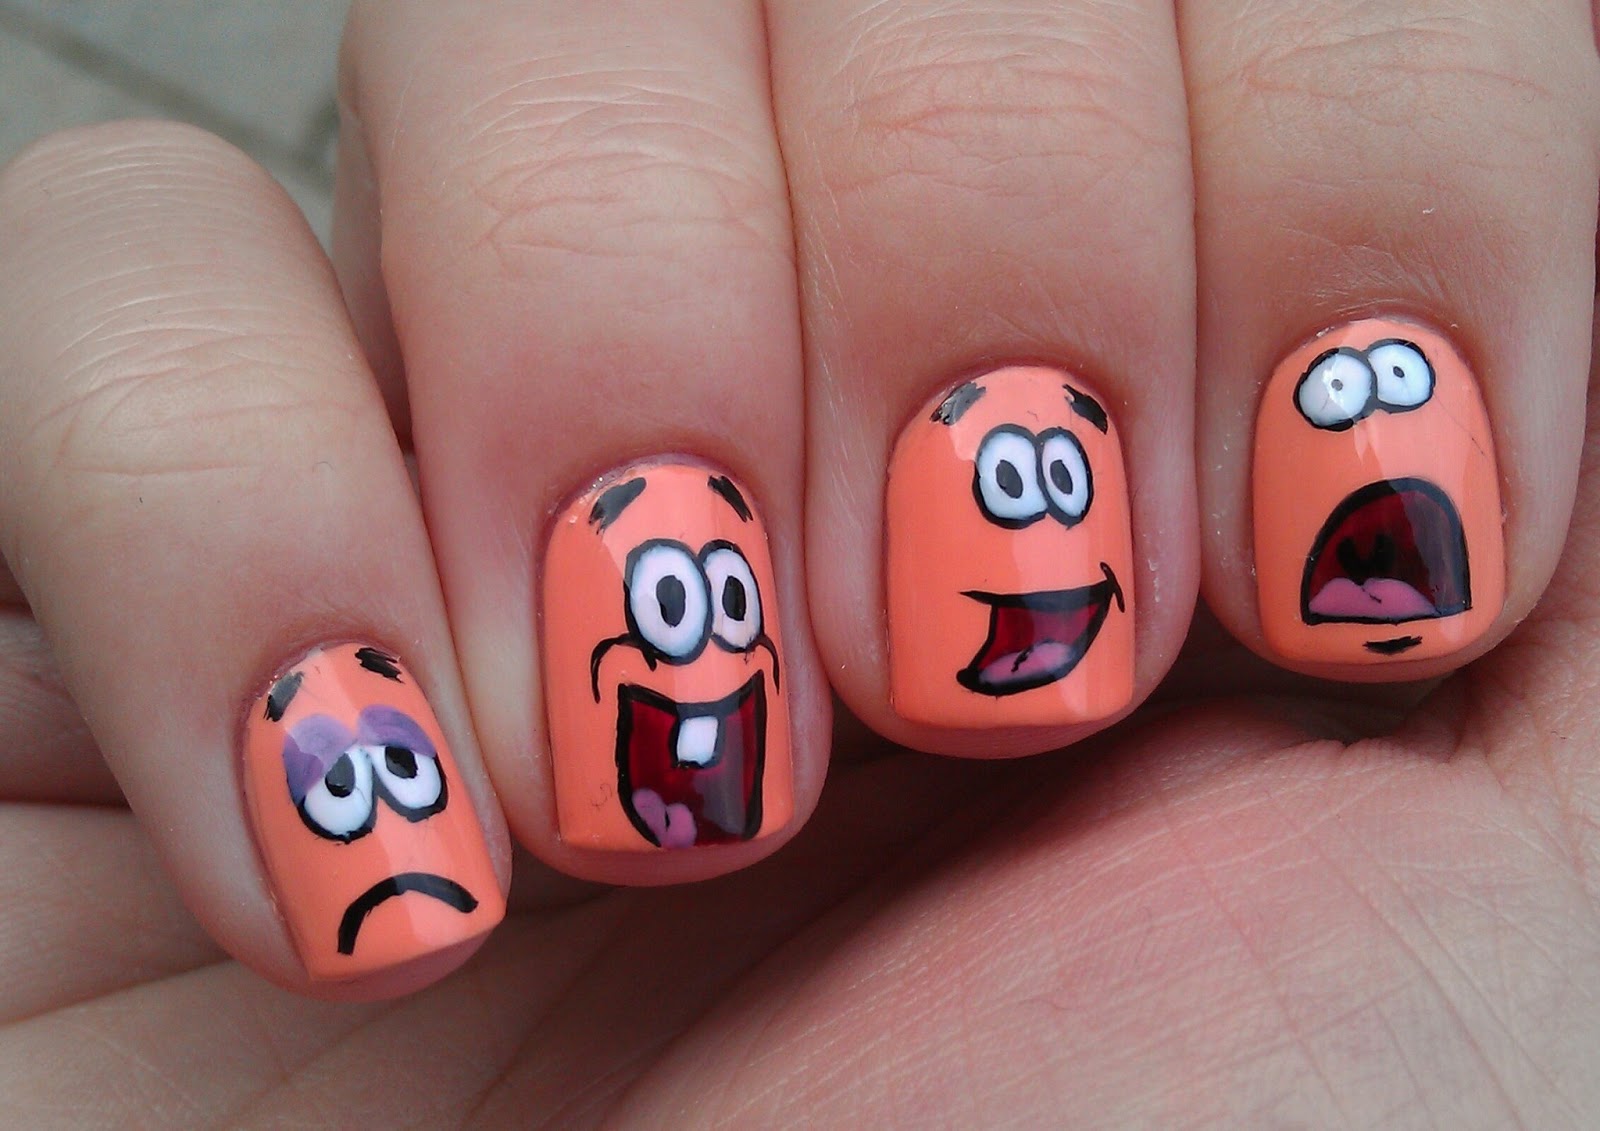 4. "Funny Animal Nail Art That Will Brighten Your Day" - wide 2